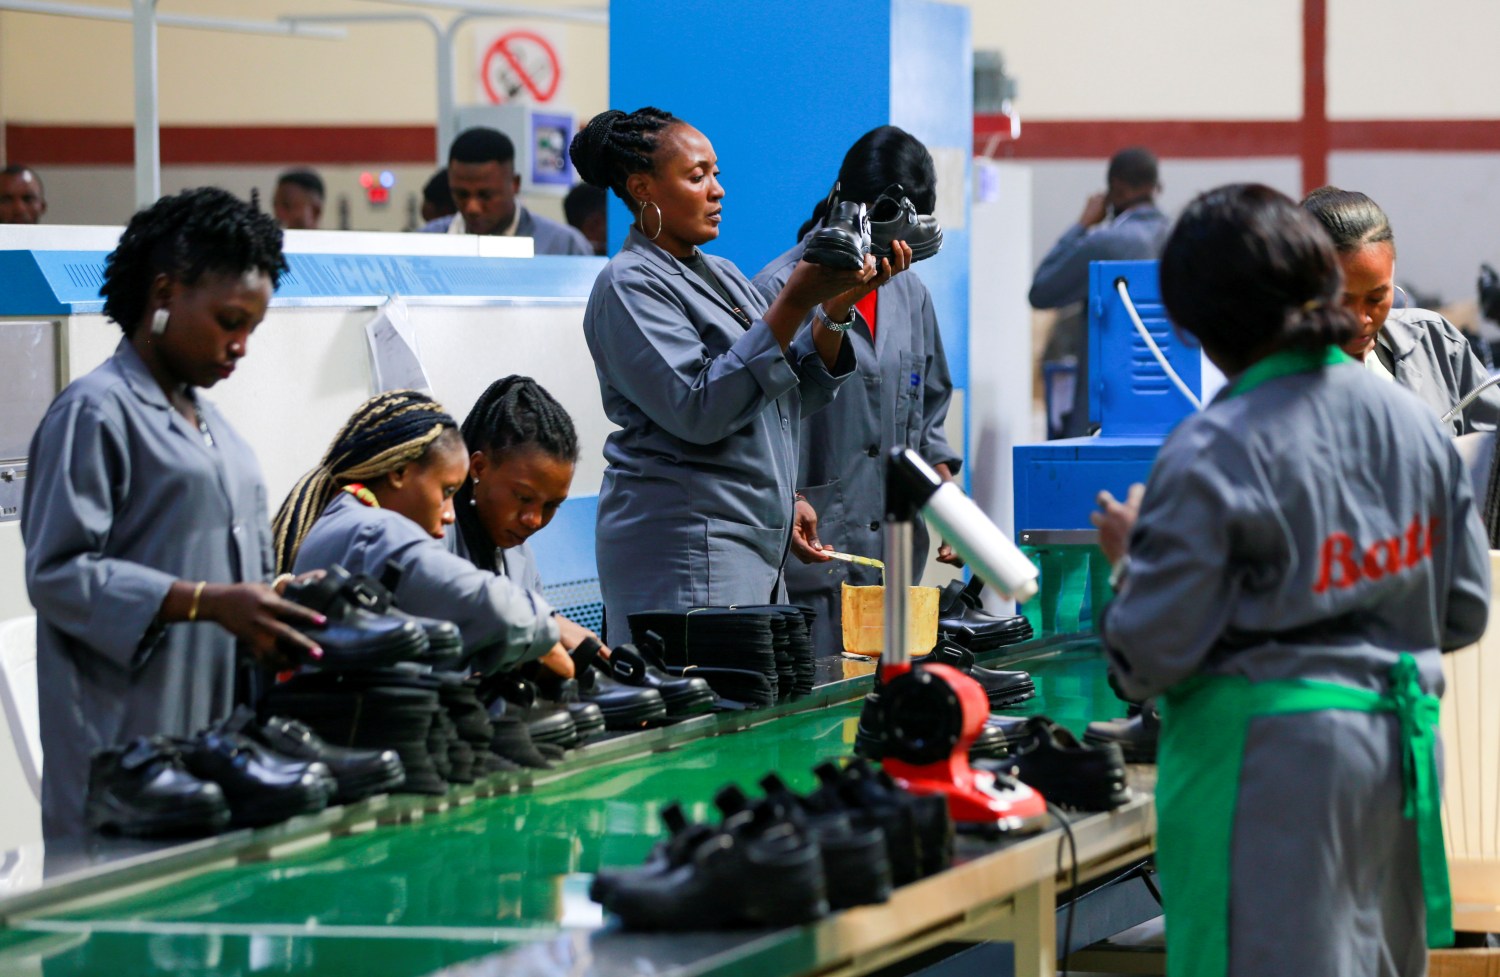 Women workers inspect shoes at a Bata shoe factory in Abuja, Nigeria January 13, 2020. Picture taken January 13, 2020. REUTERS/Afolabi Sotunde